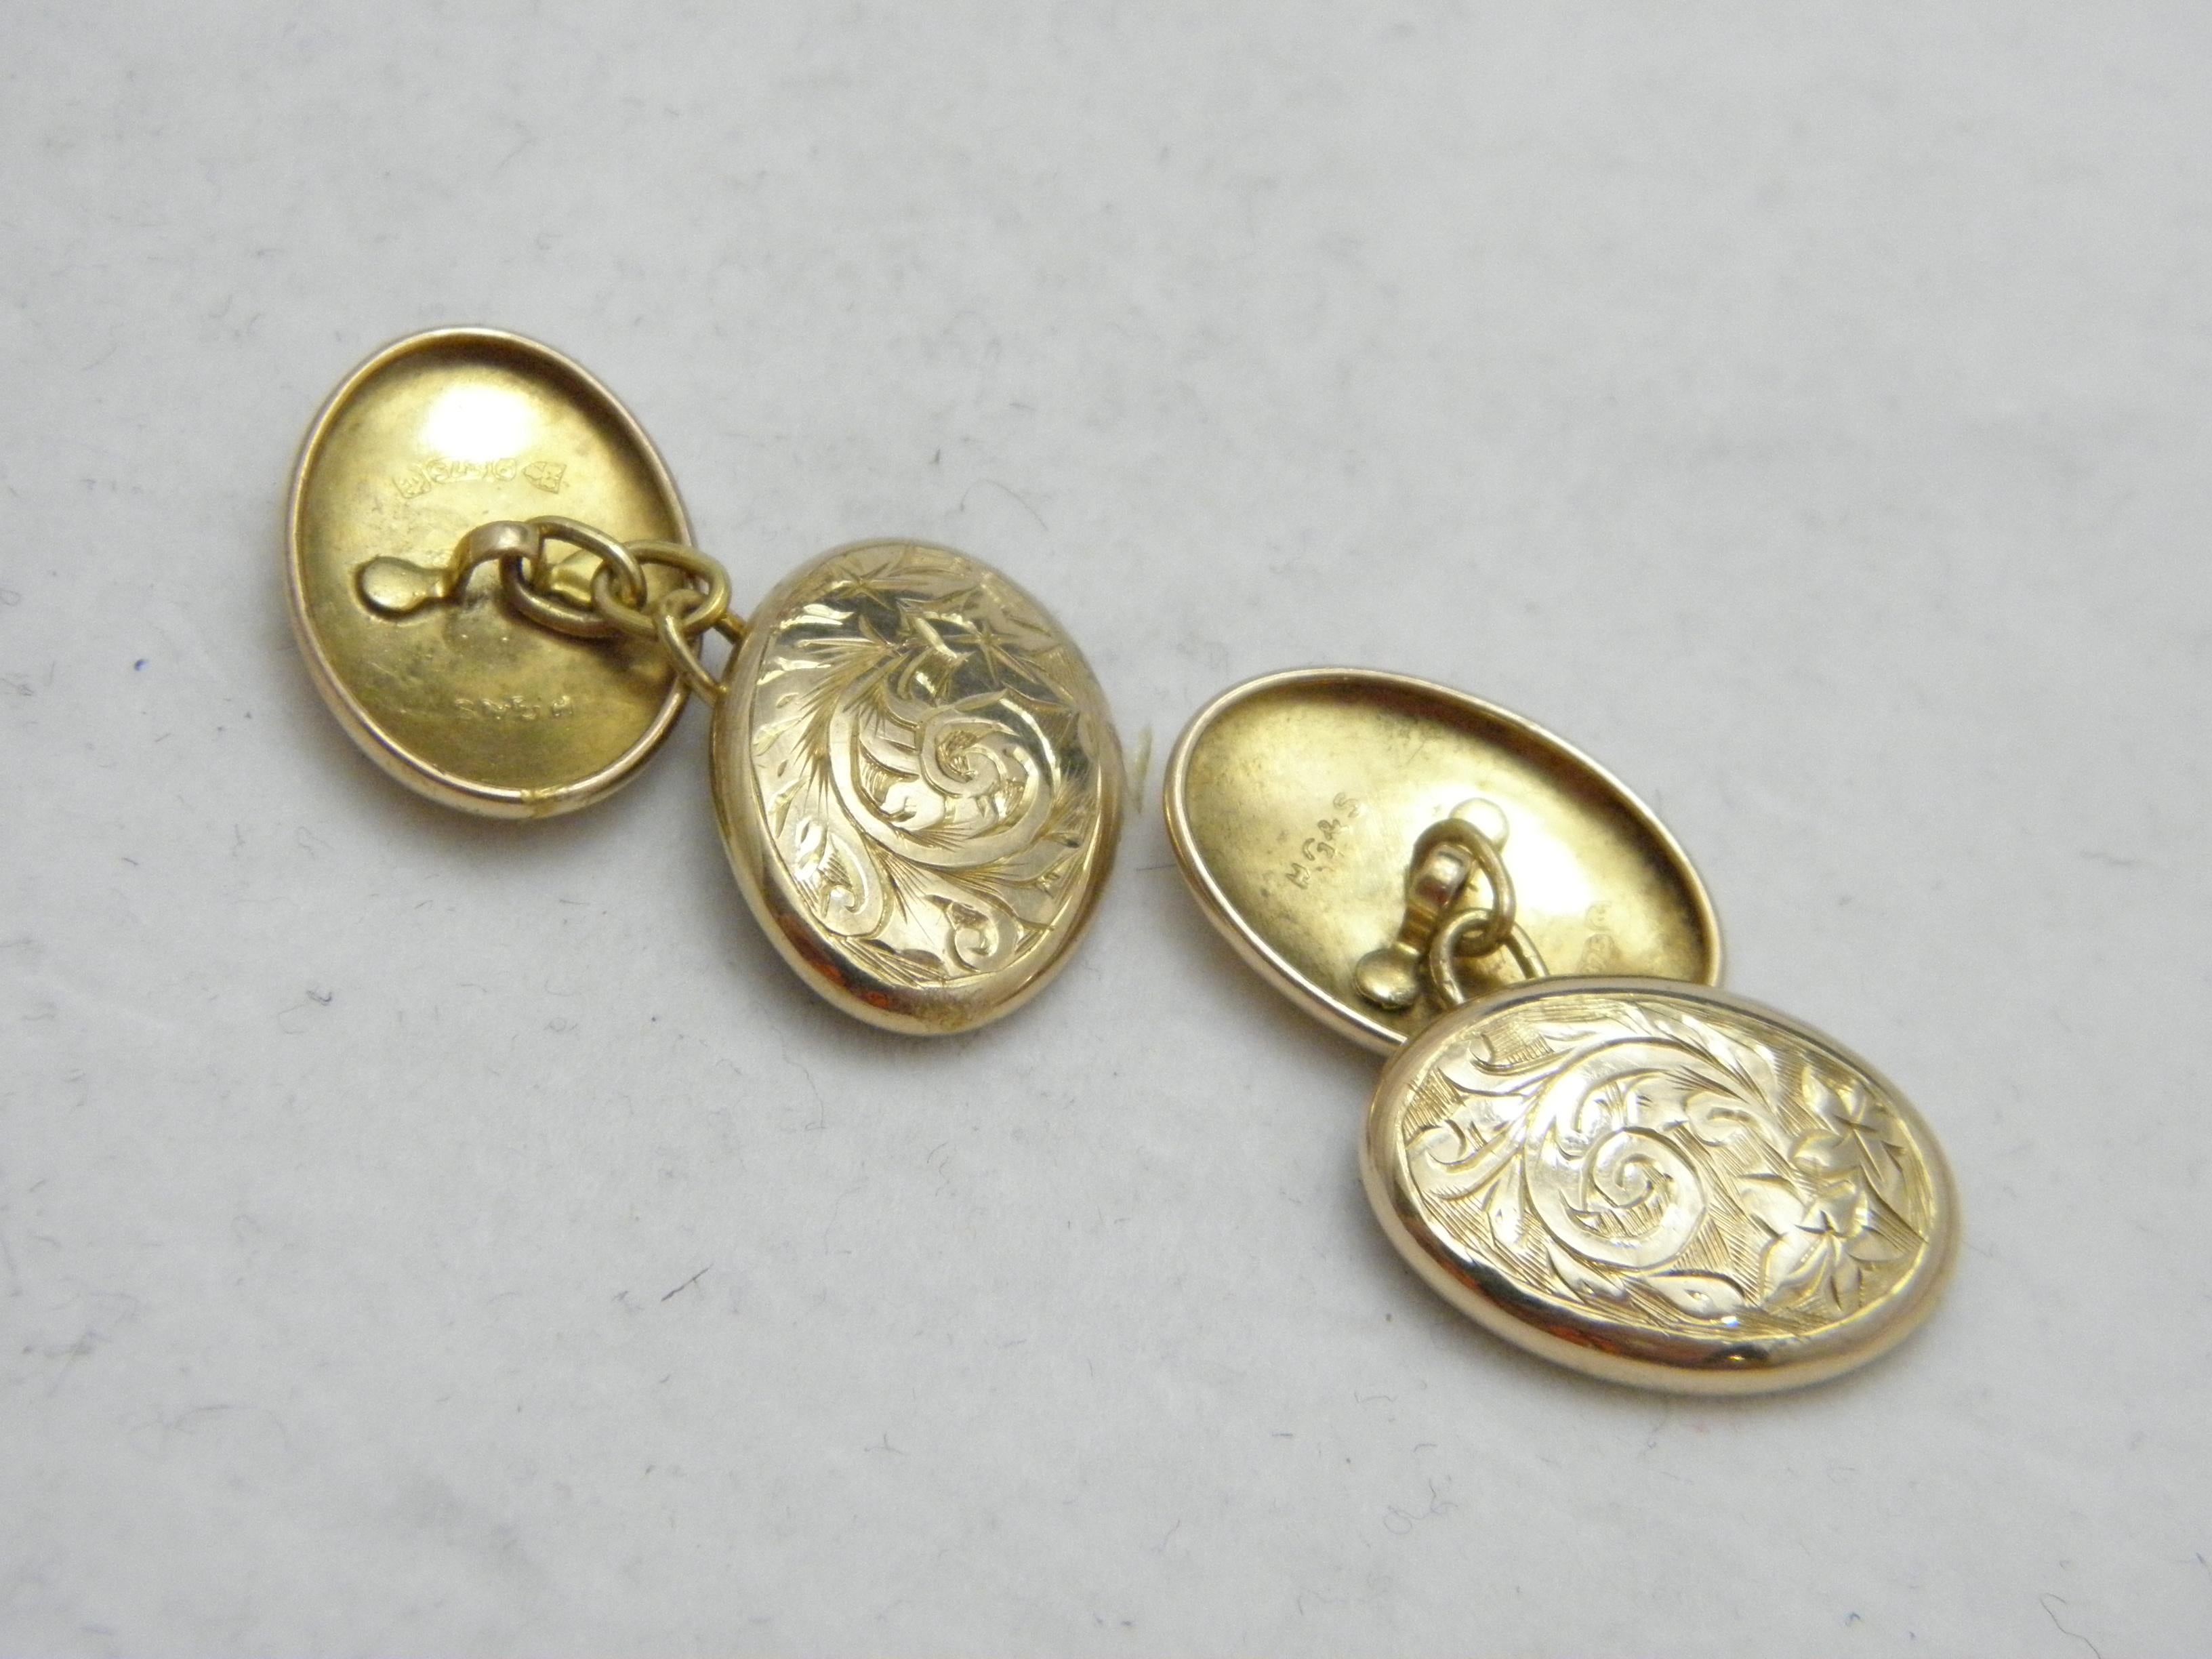 Contemporary Vintage 9ct Gold Gents Cufflinks 375 Purity Art Deco Heavy Cuff Links HG&S